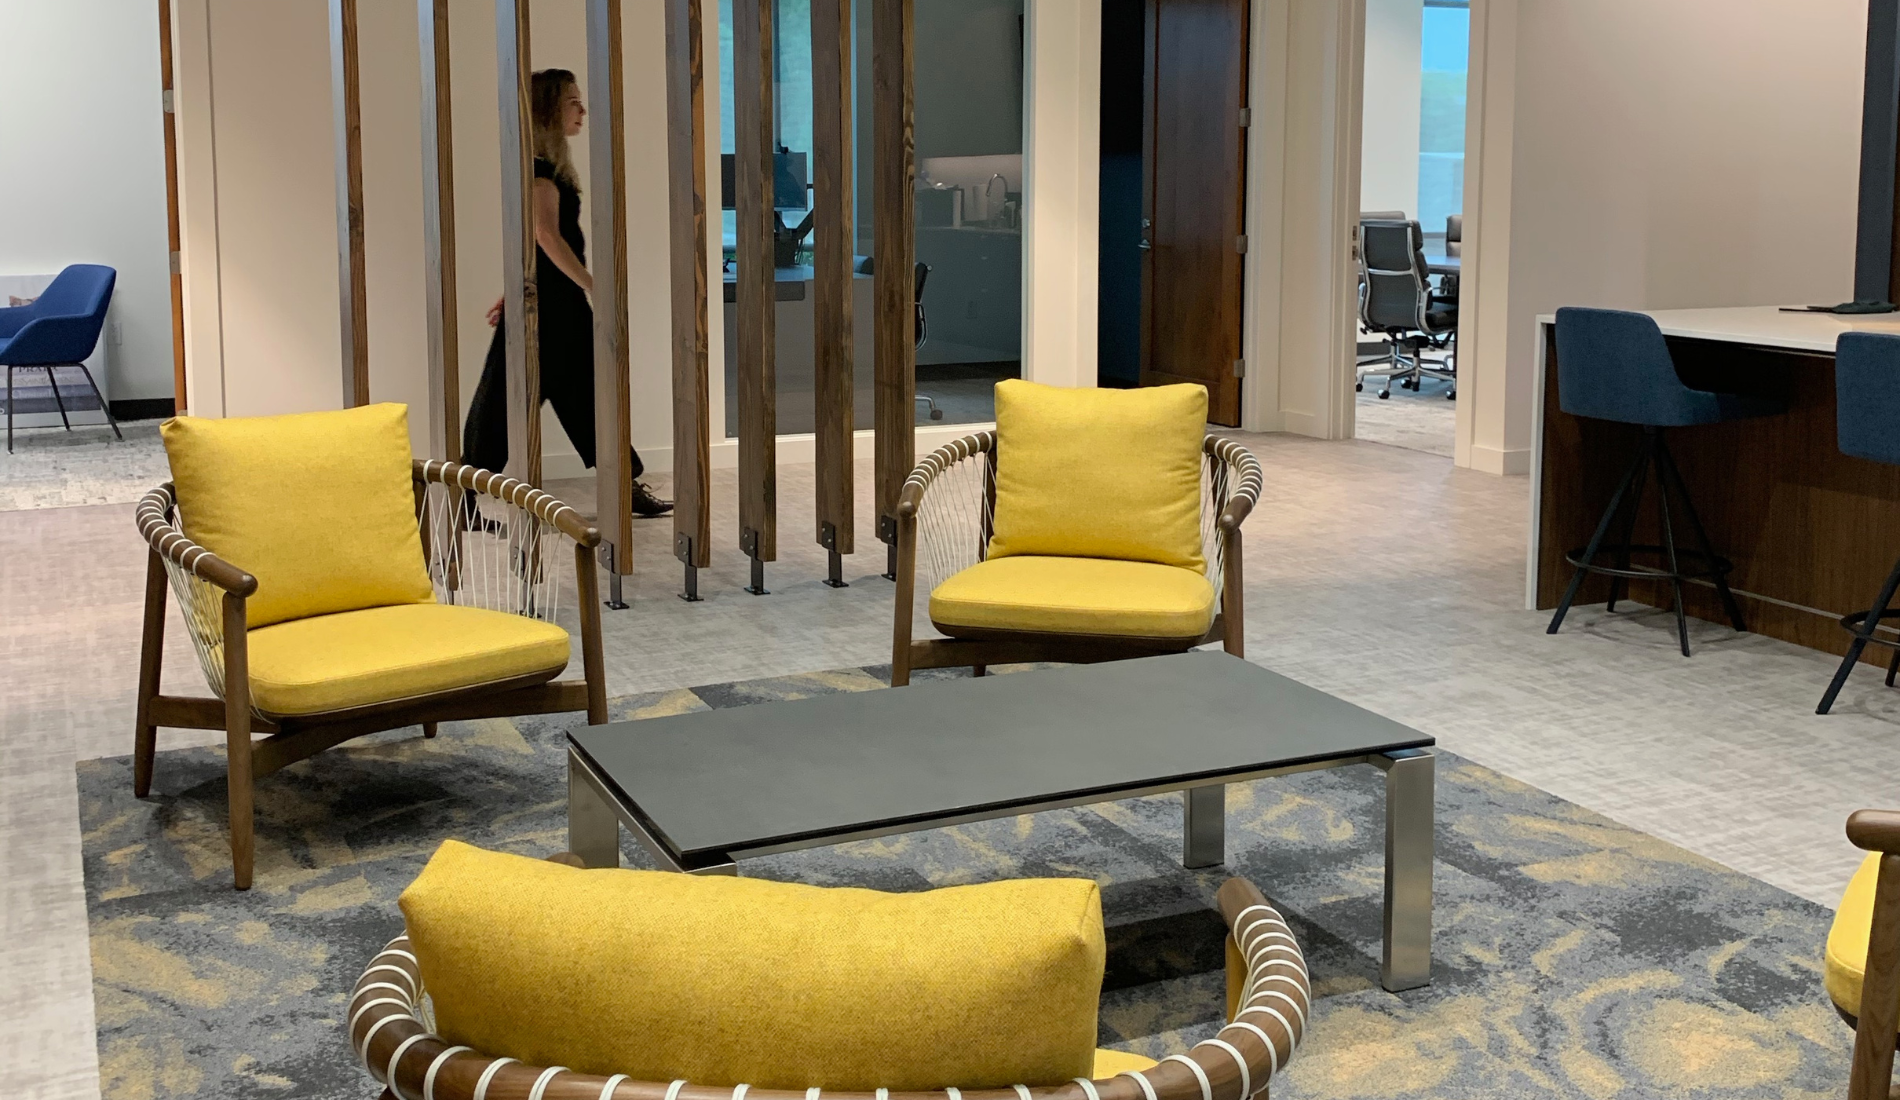 san diego interior design of office space with yellow chairs, rug, table, and person walking through hallway